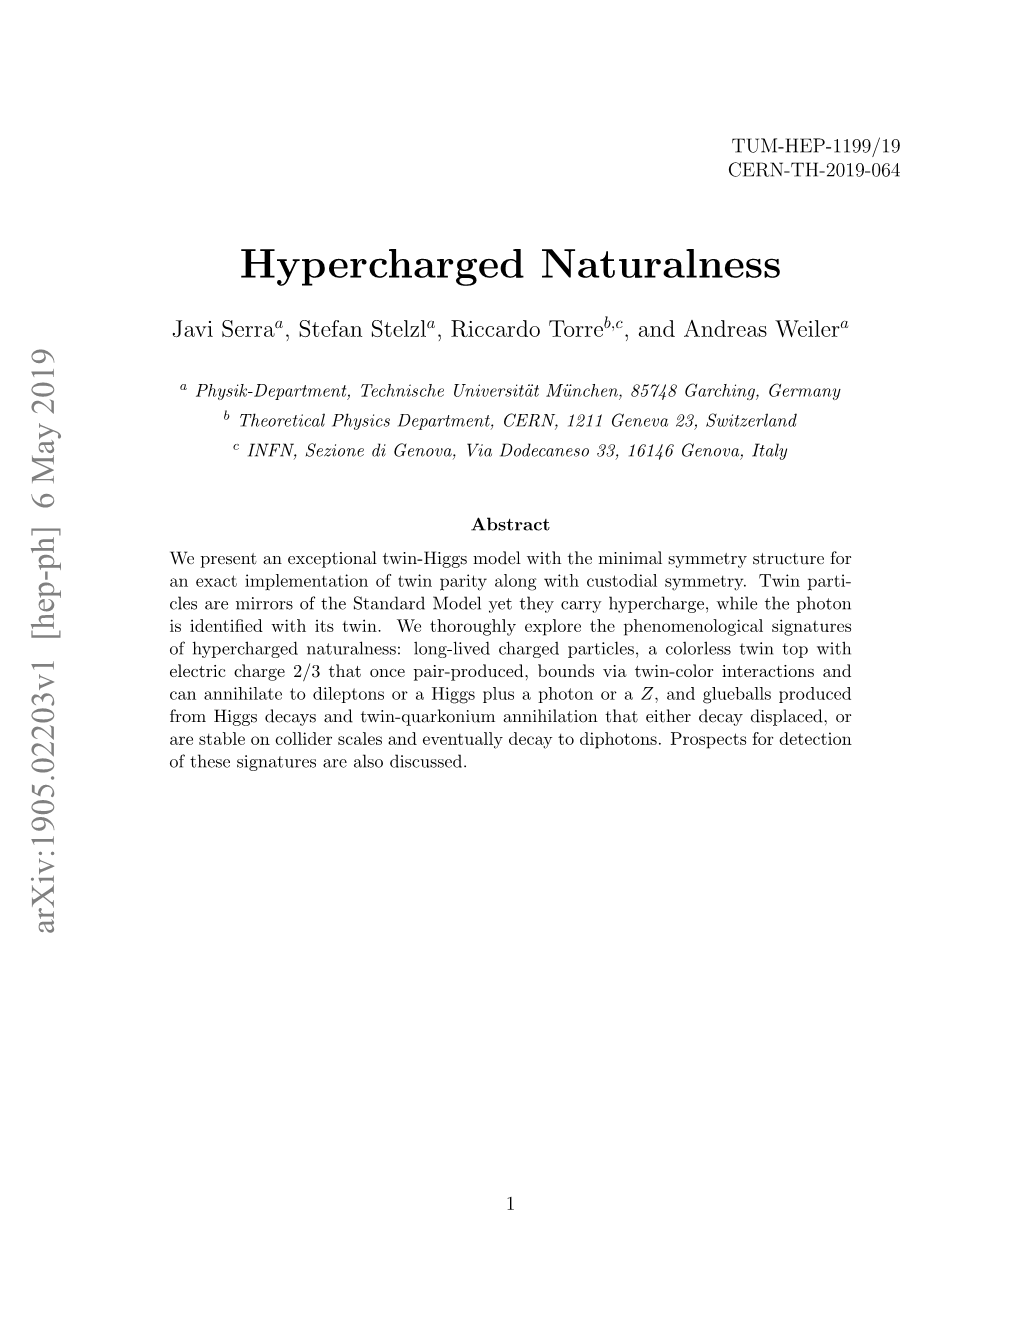 Hypercharged Naturalness